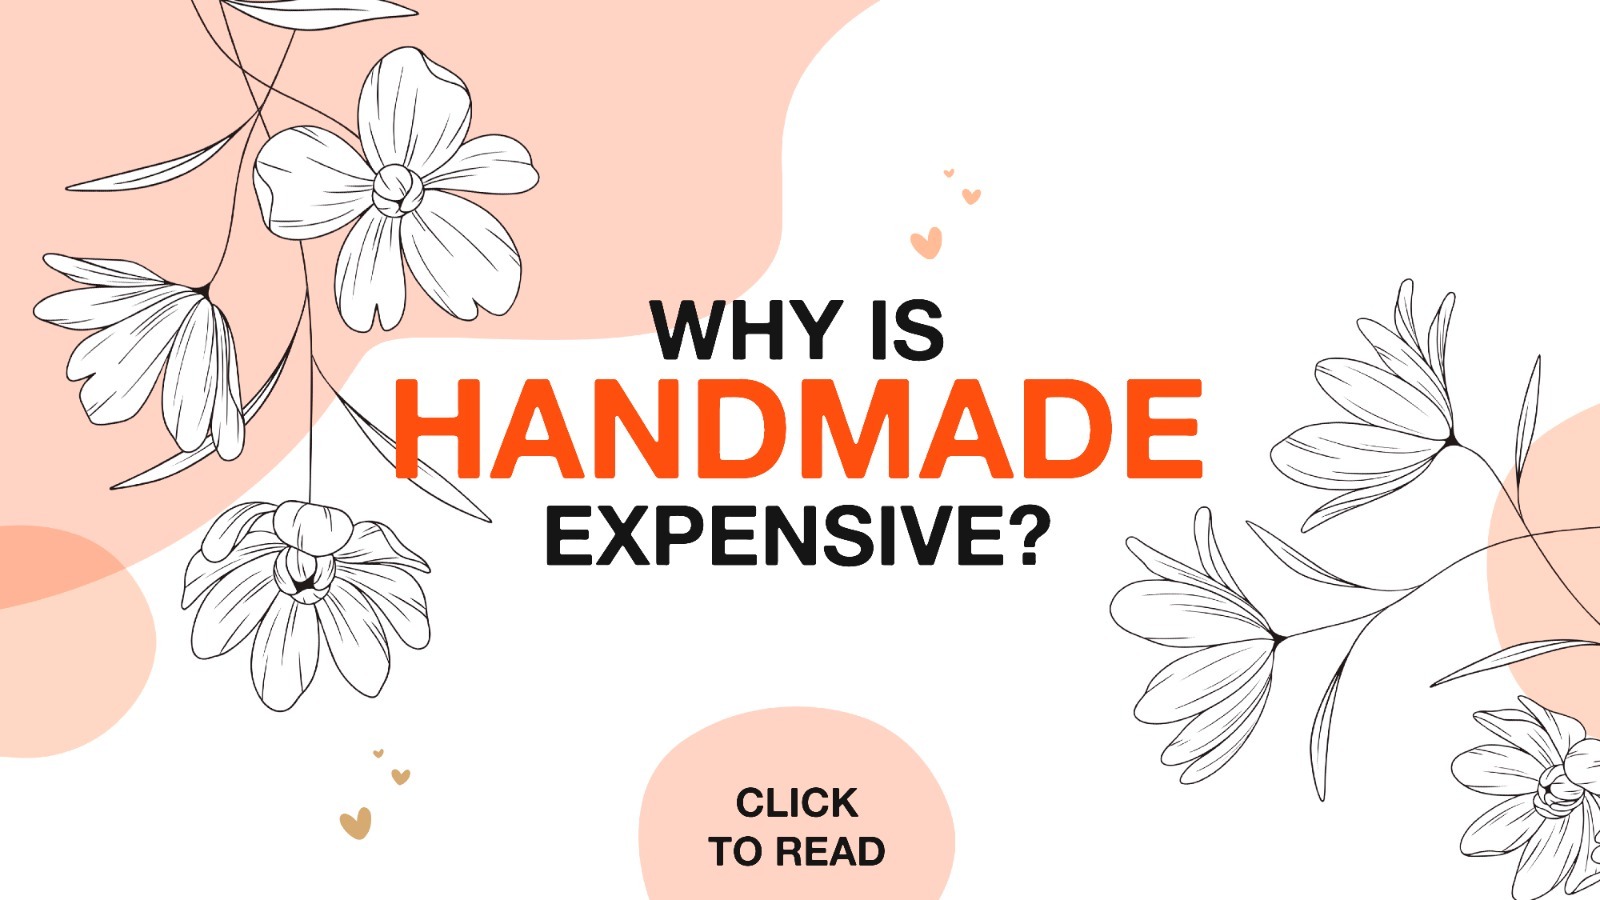 Why is handmade expensive?